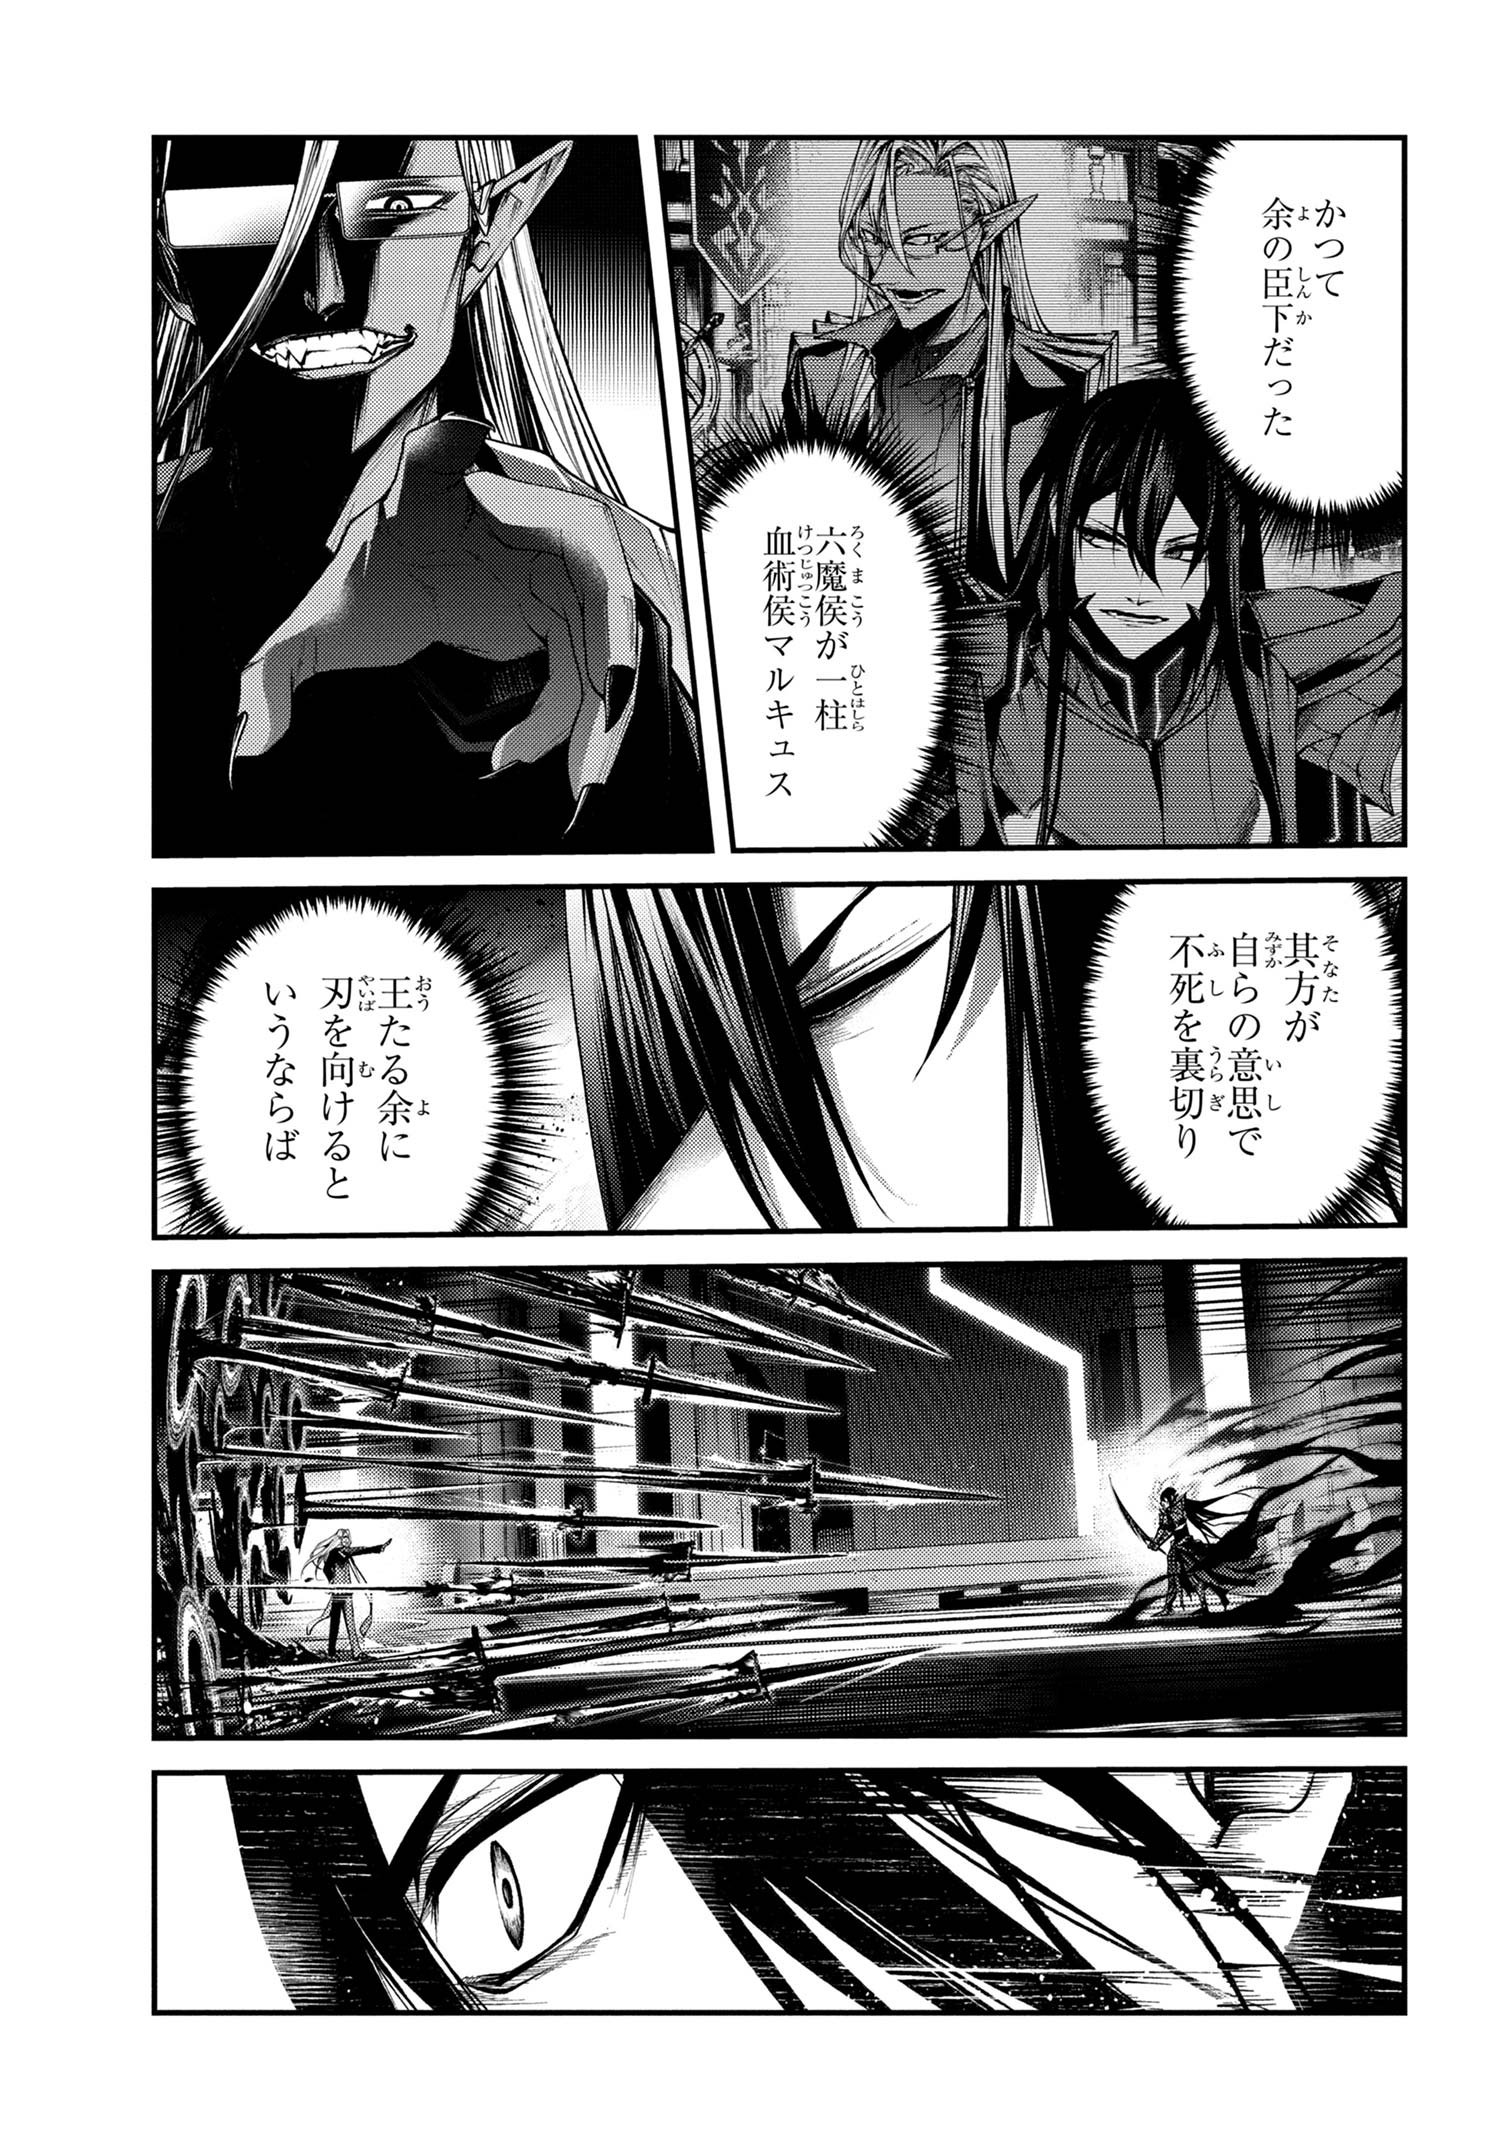 Maou 2099 - Chapter 11.1 - Page 3